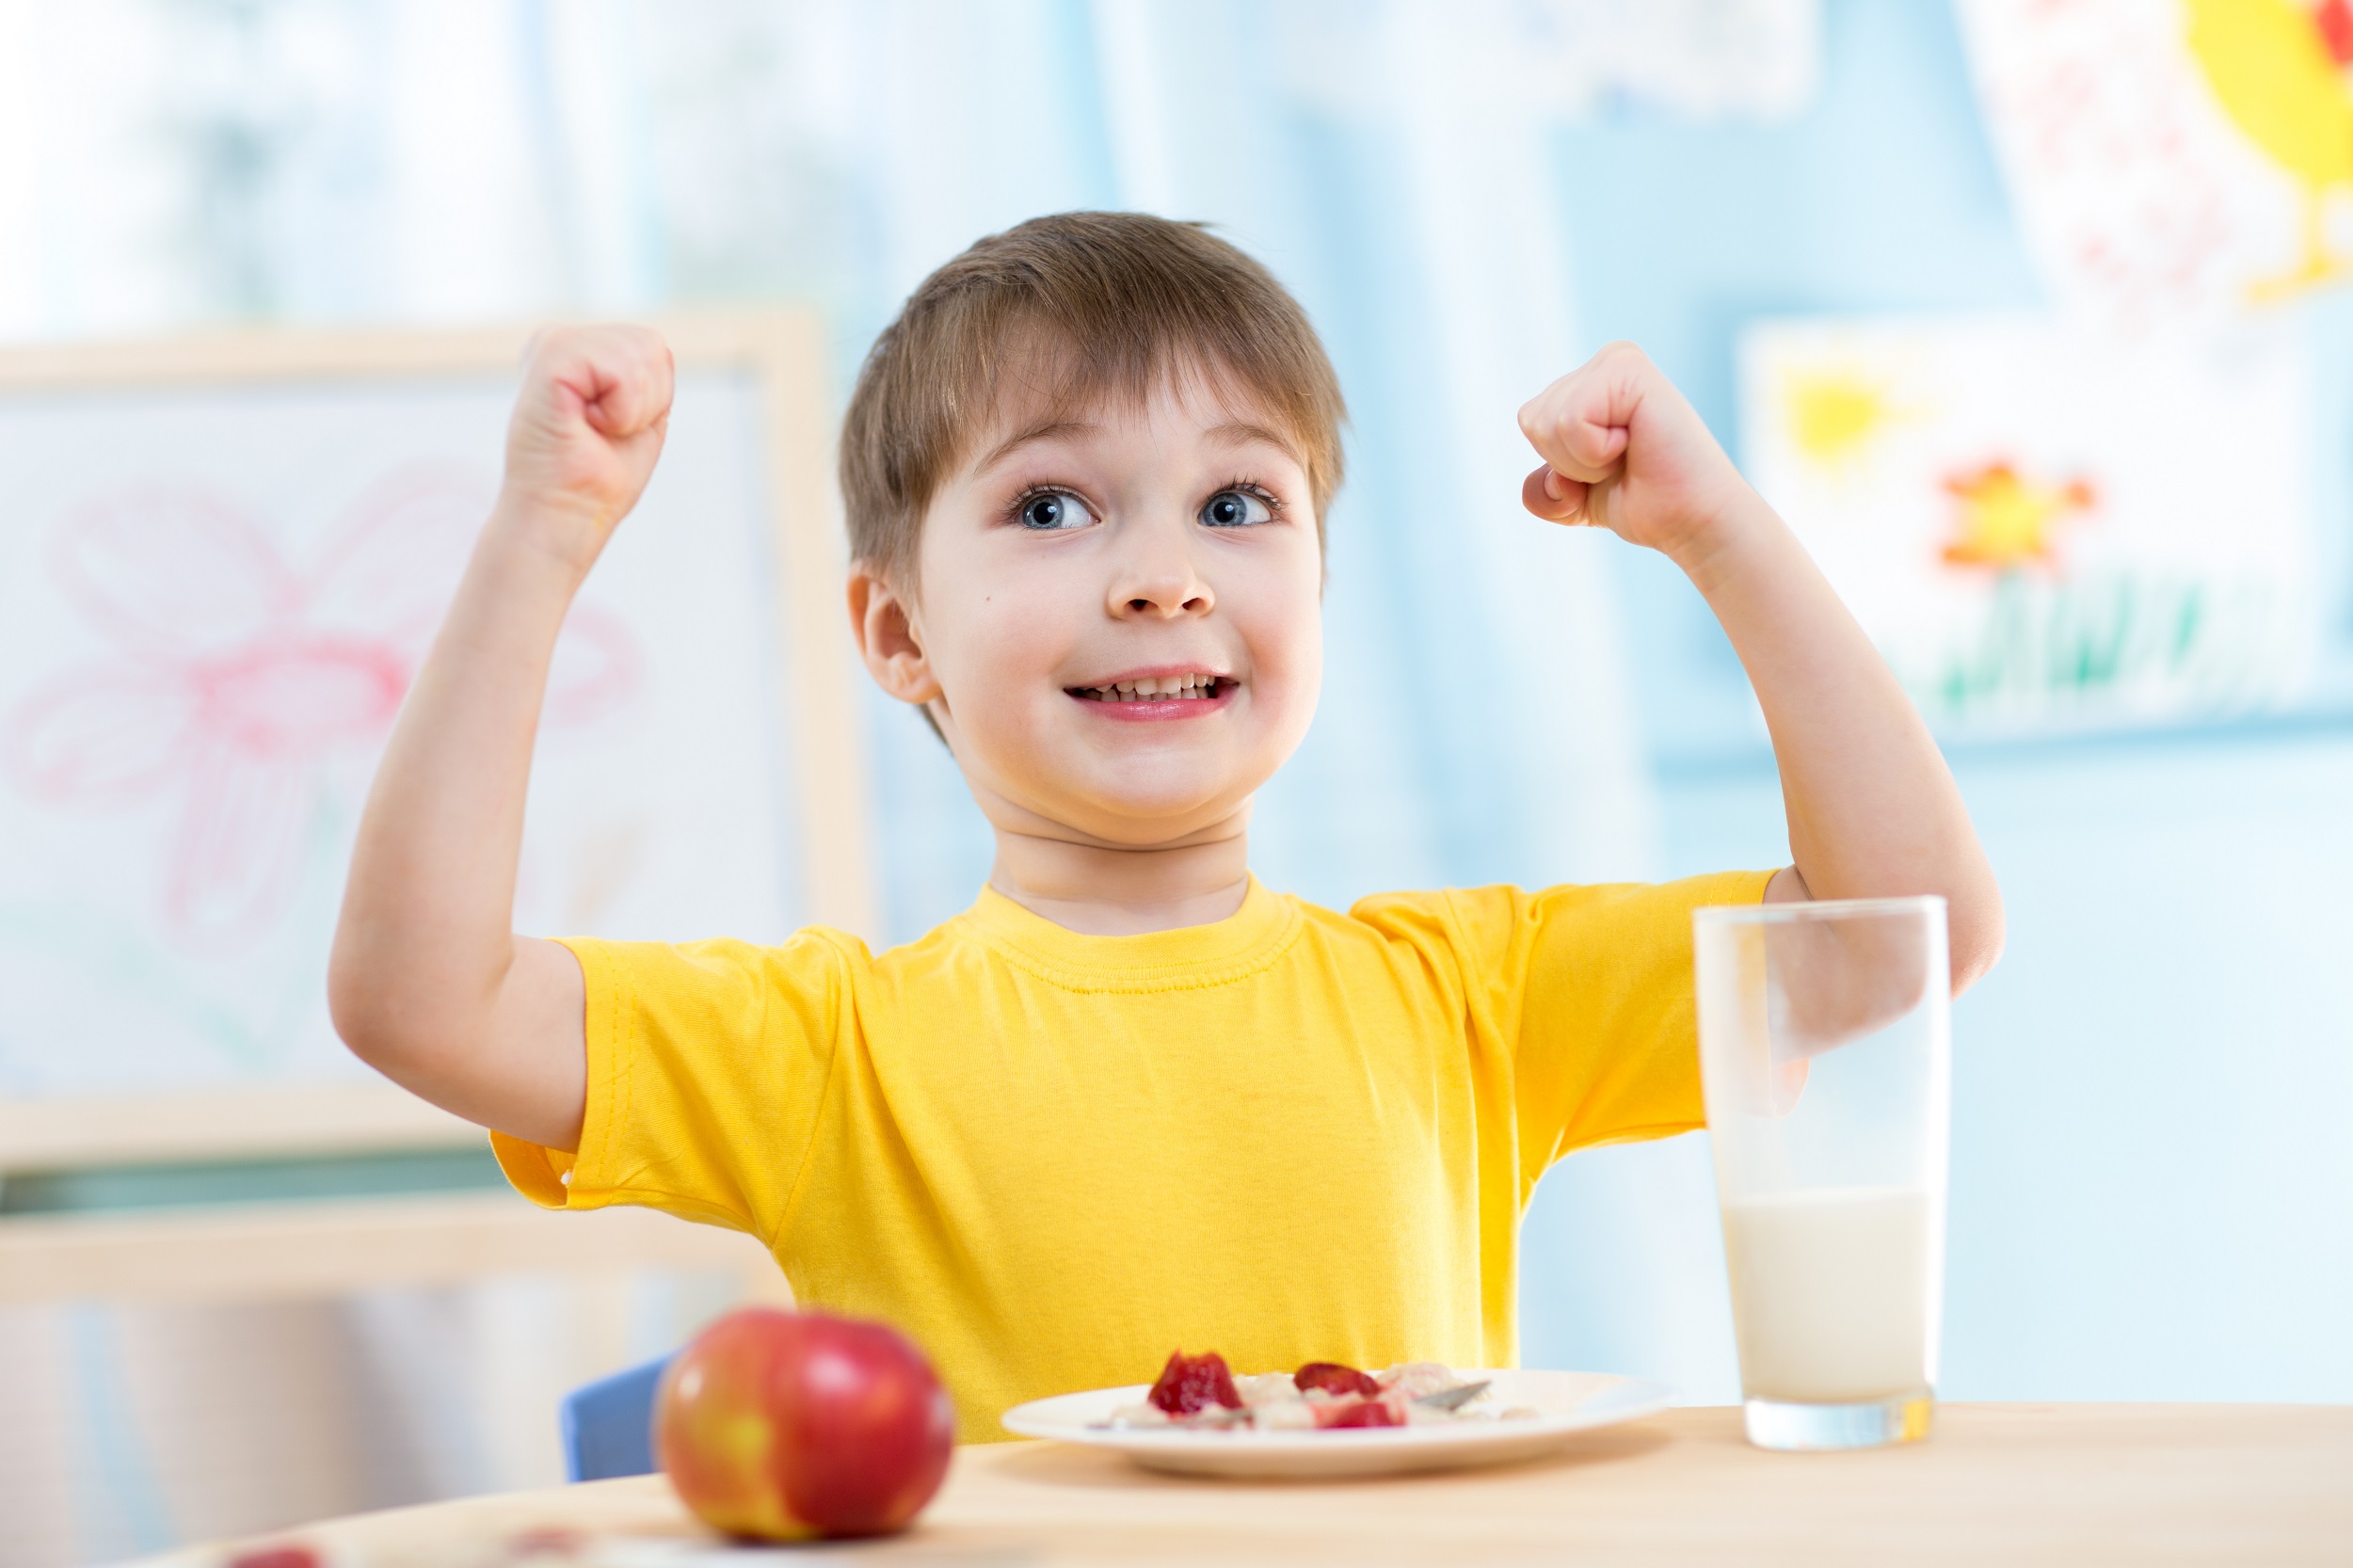 Young Boy Yellow Shirt Arms Up Healthy Food Eating